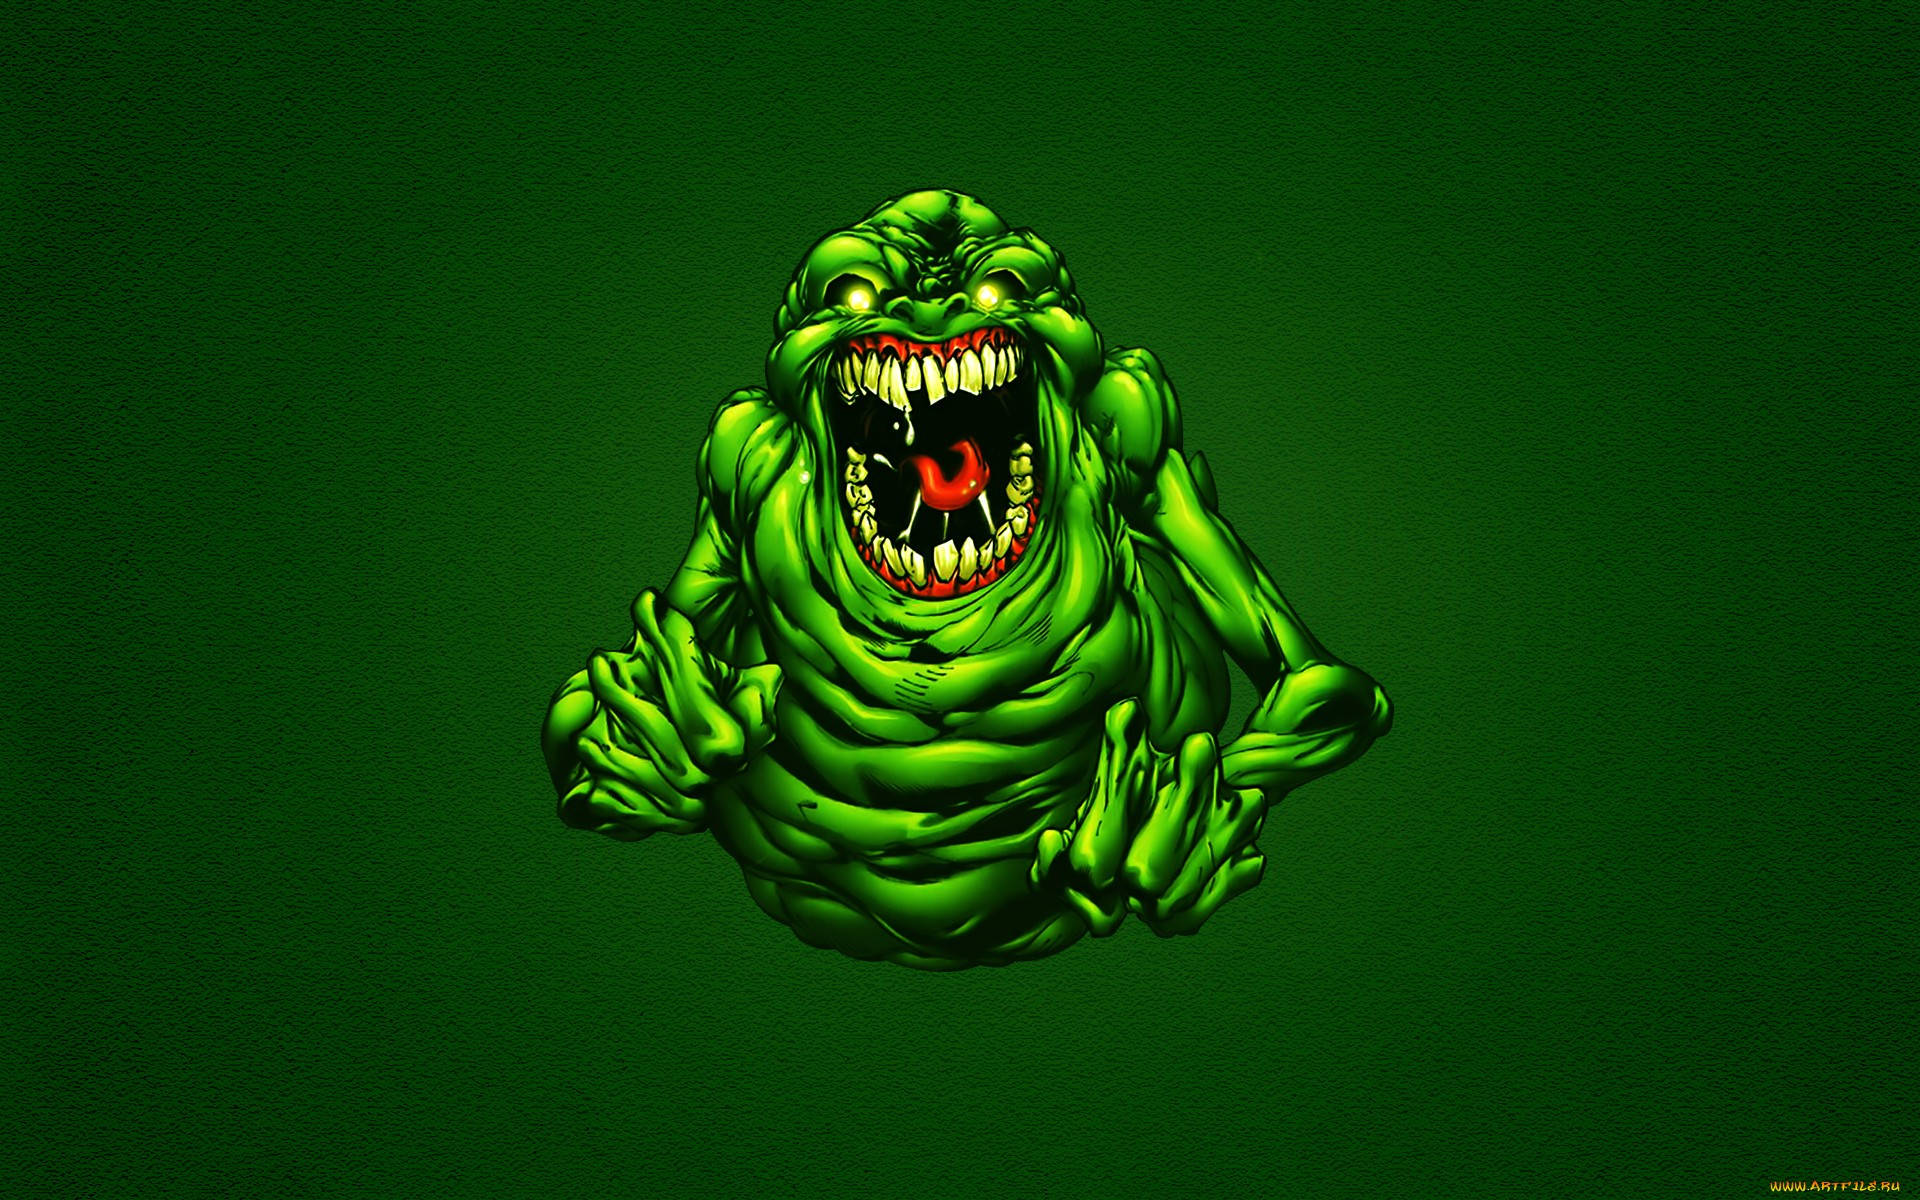 Ghostbusters Slimer Background